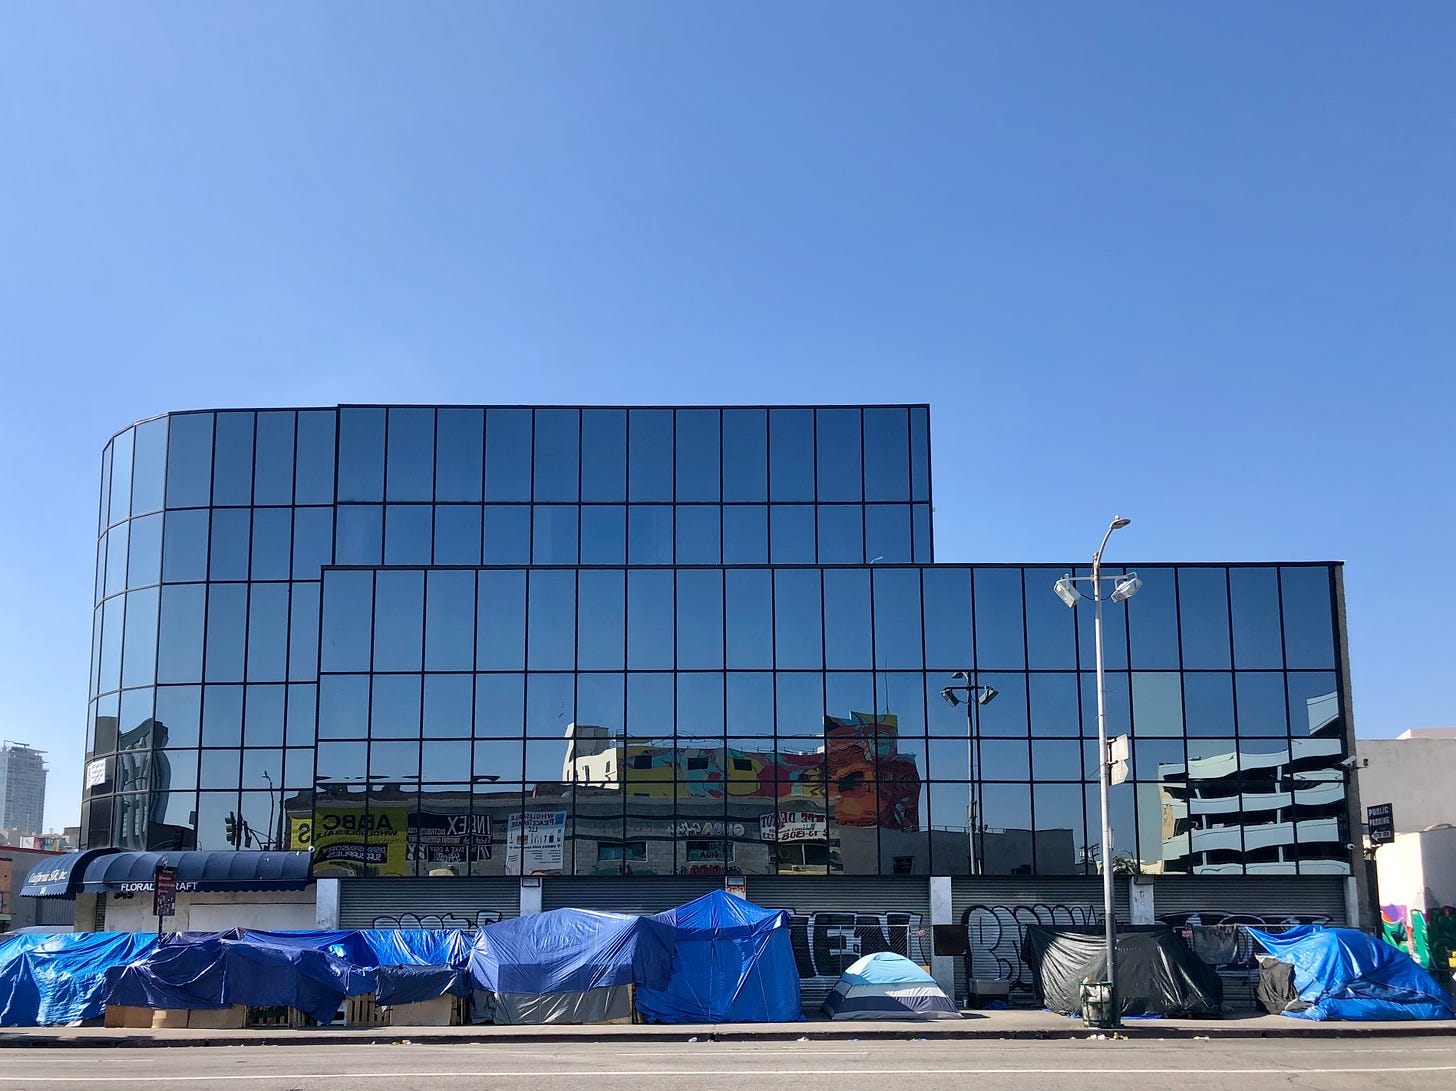 A three story, reflective glass building in Skid Row, Los Angeles surronded by makeshift shelters draped in blue tarps.